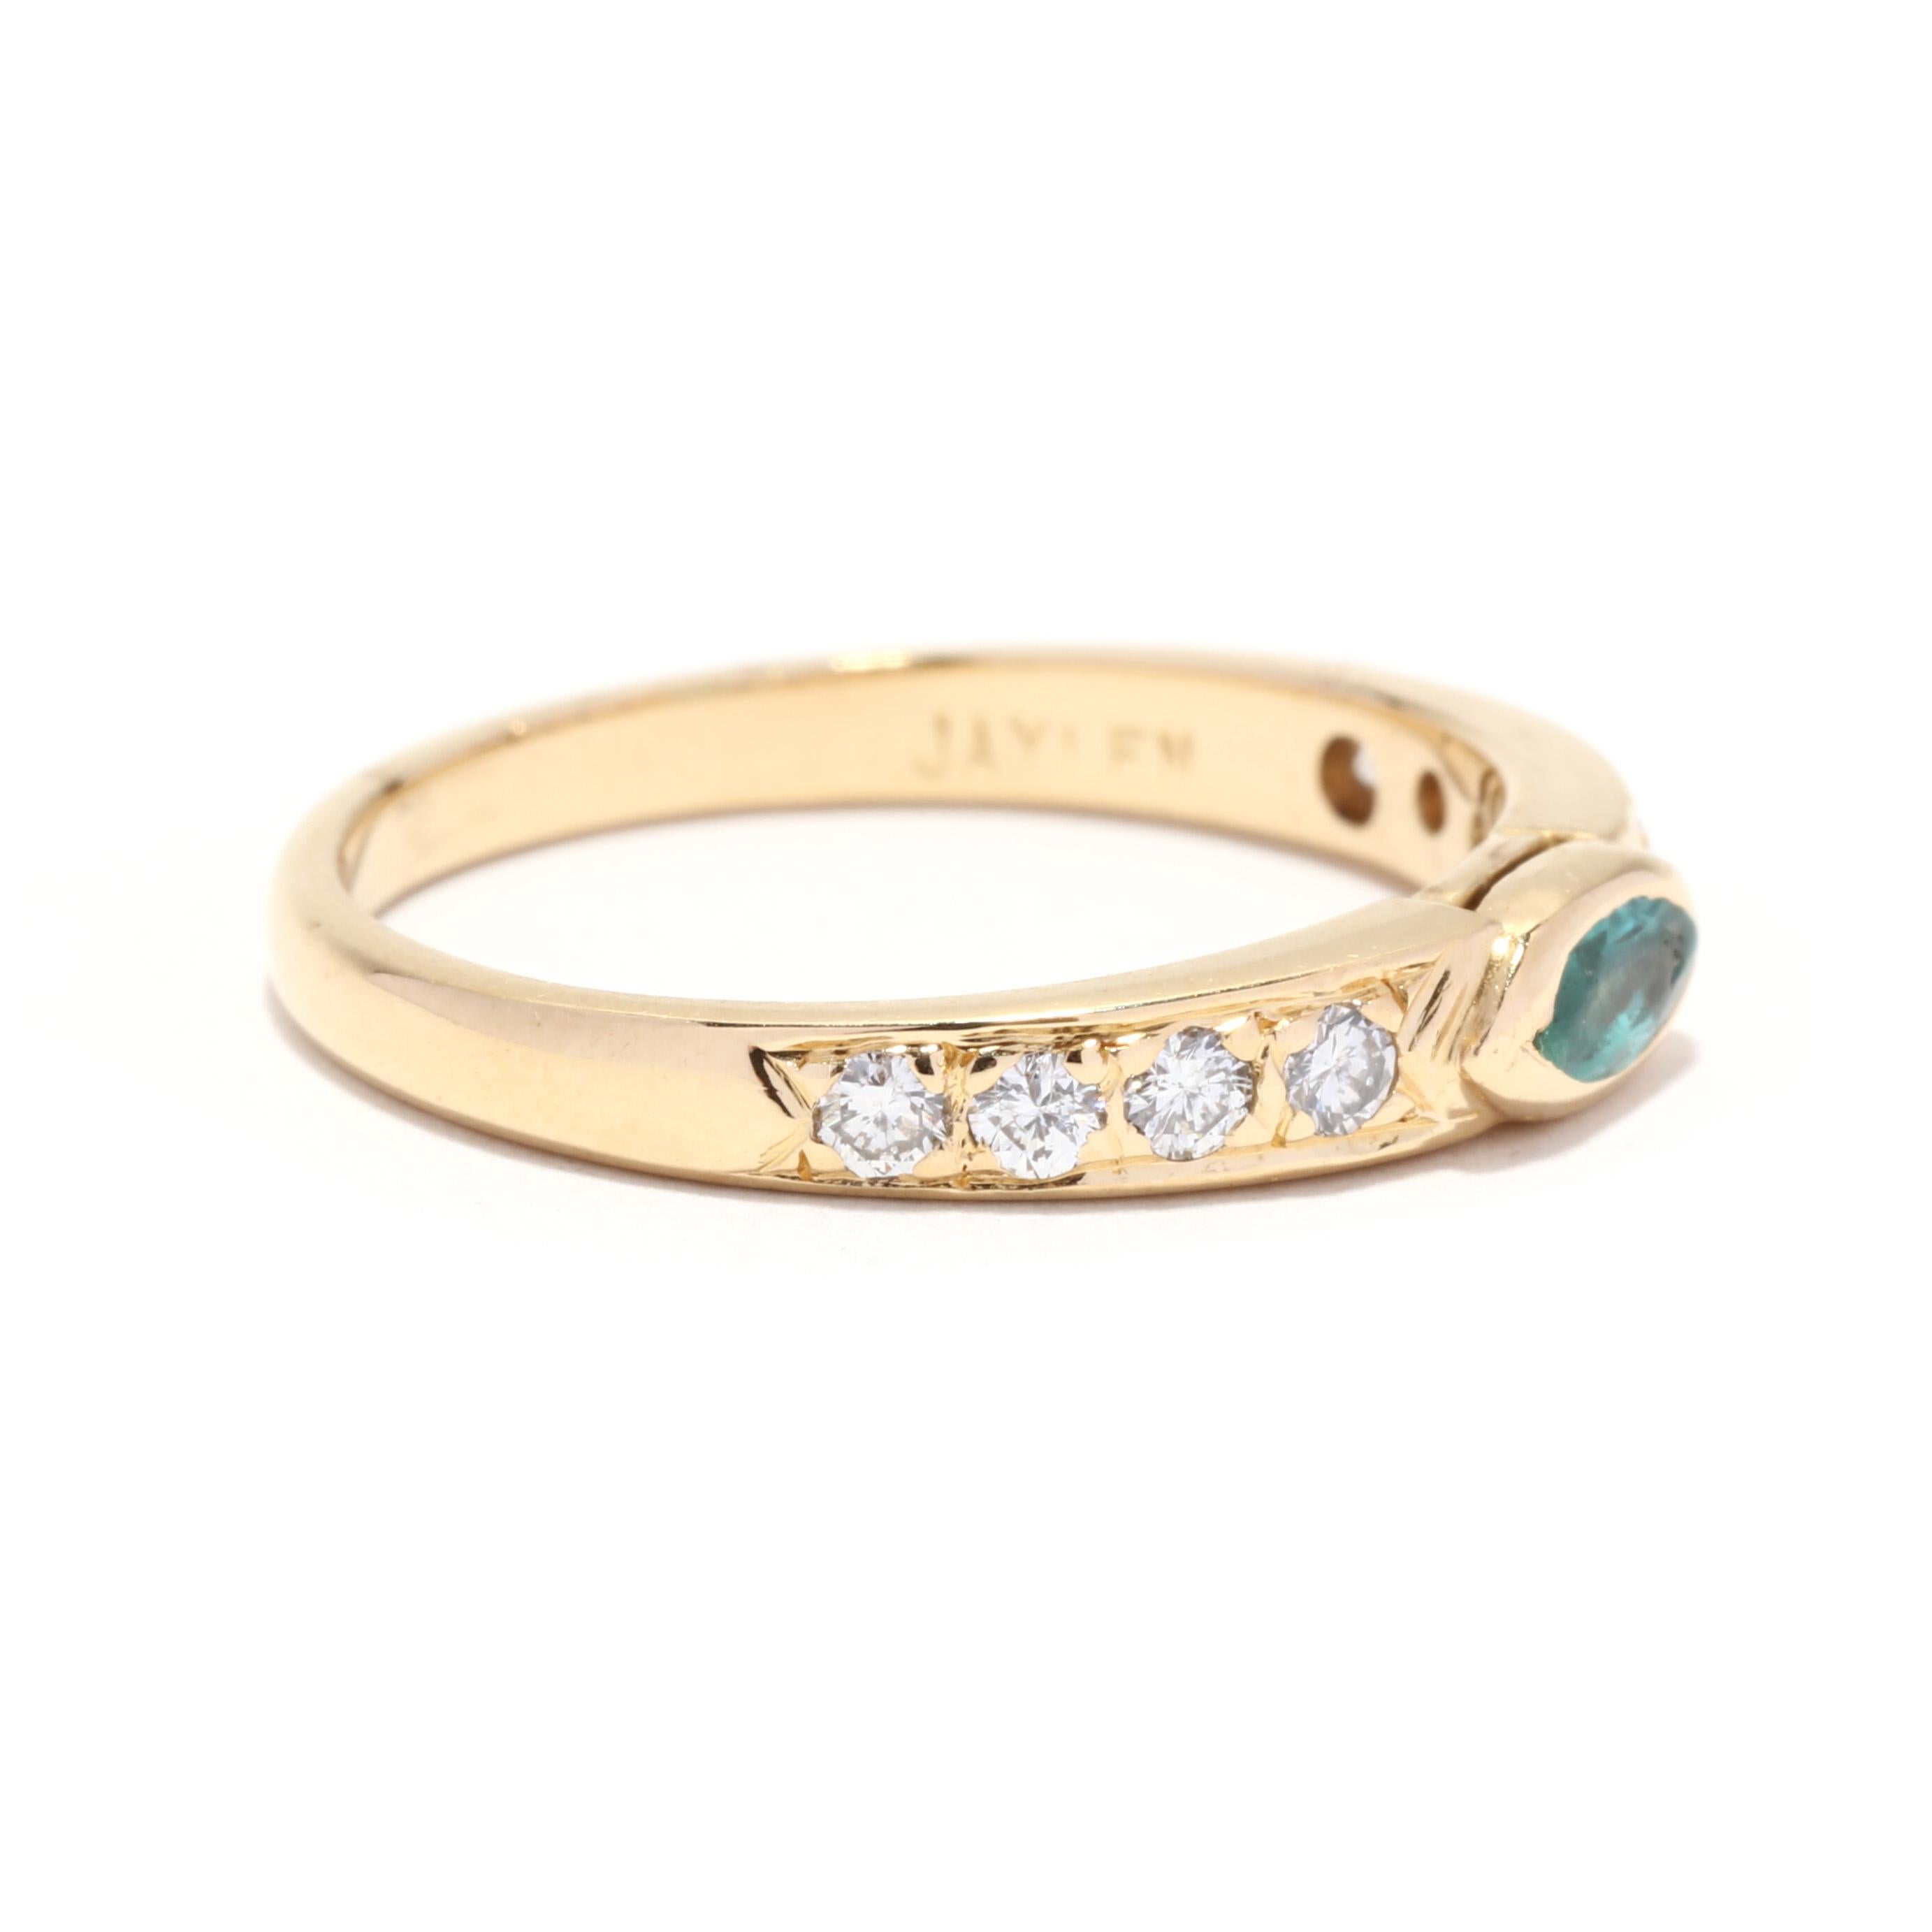 An 18 karat yellow gold tourmaline and diamond stackable band ring. This vintage ring features a horizontal bezel set, marquise cut blueish green tourmaline weighing approximately .15 carat with a tapered band accented with round brilliant cut